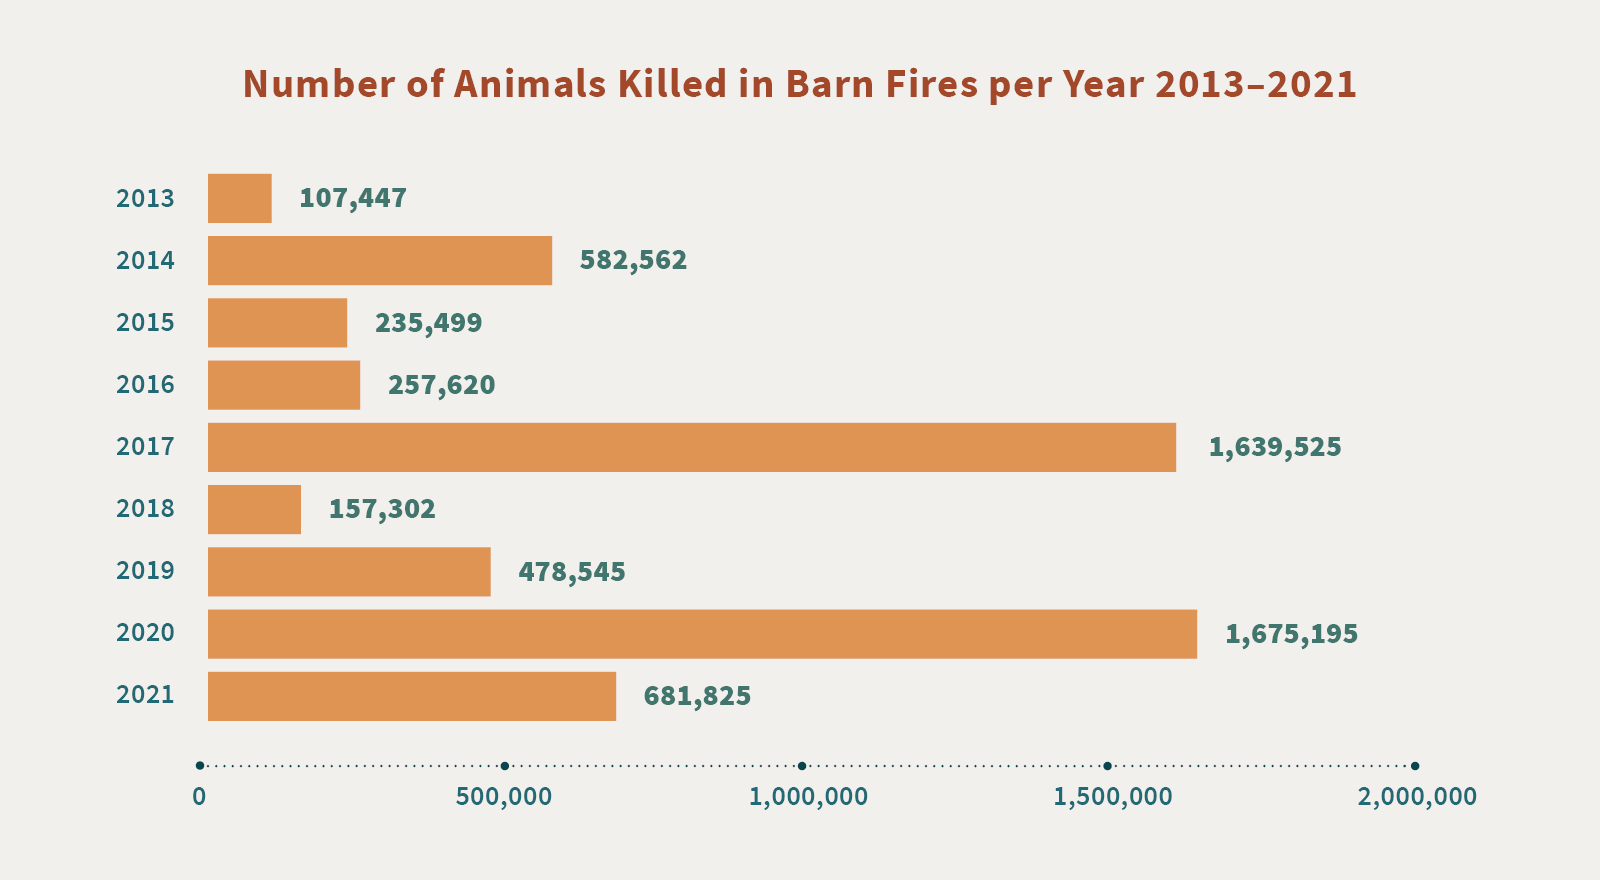 INFOGRAPHIC: Number of Animals Killed in Barn Fires per Year 2013-2020